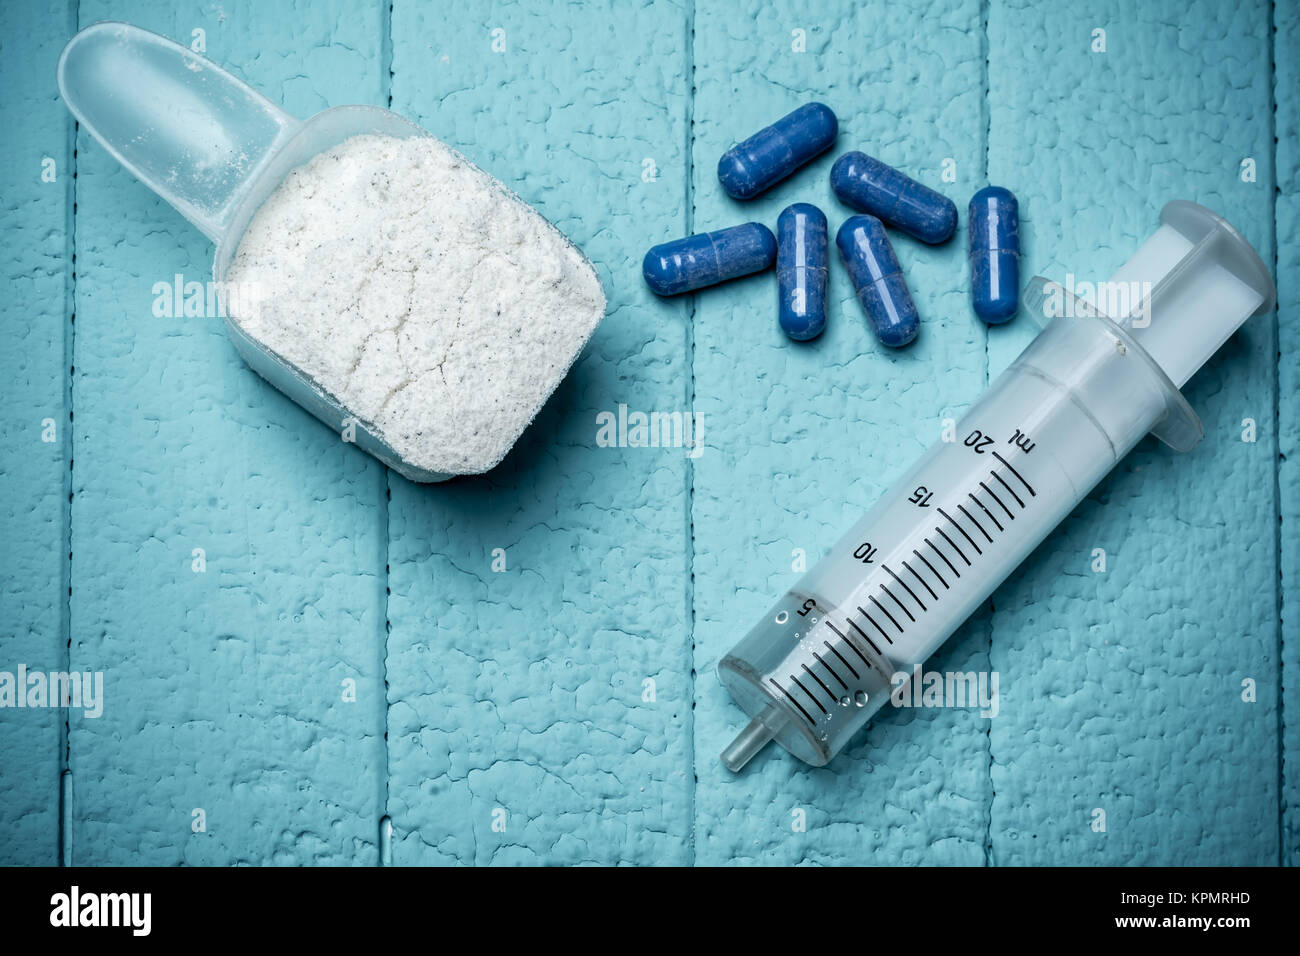 https://c8.alamy.com/comp/KPMRHD/container-of-milk-whey-protein-empty-injection-and-pills-close-up-KPMRHD.jpg